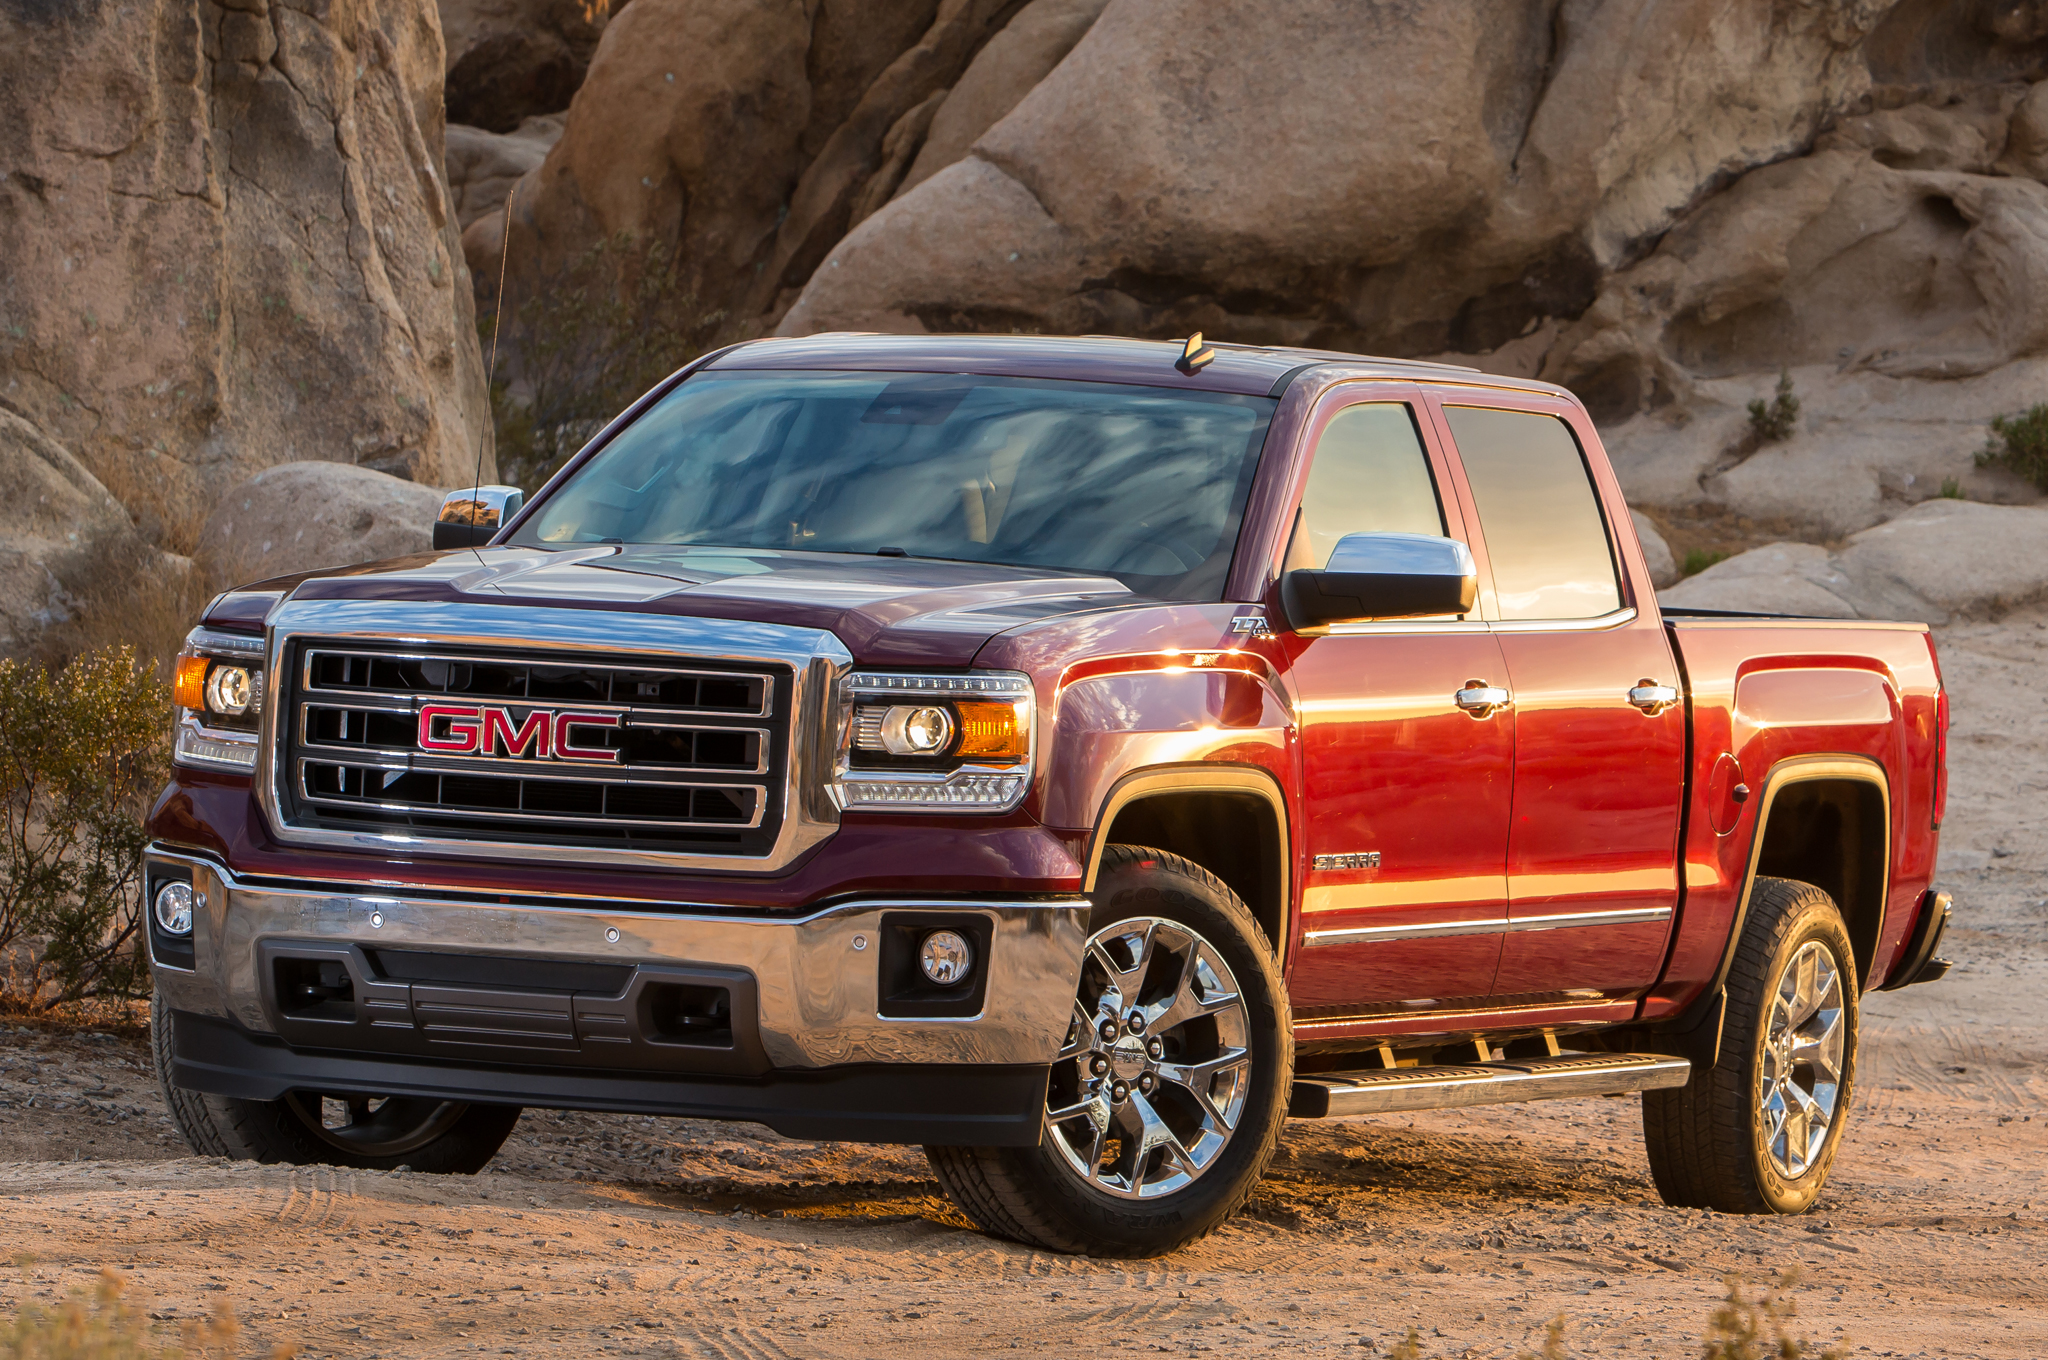 2014 Red GMC Sierra 1500 Front Three Quarters View Photo Picture